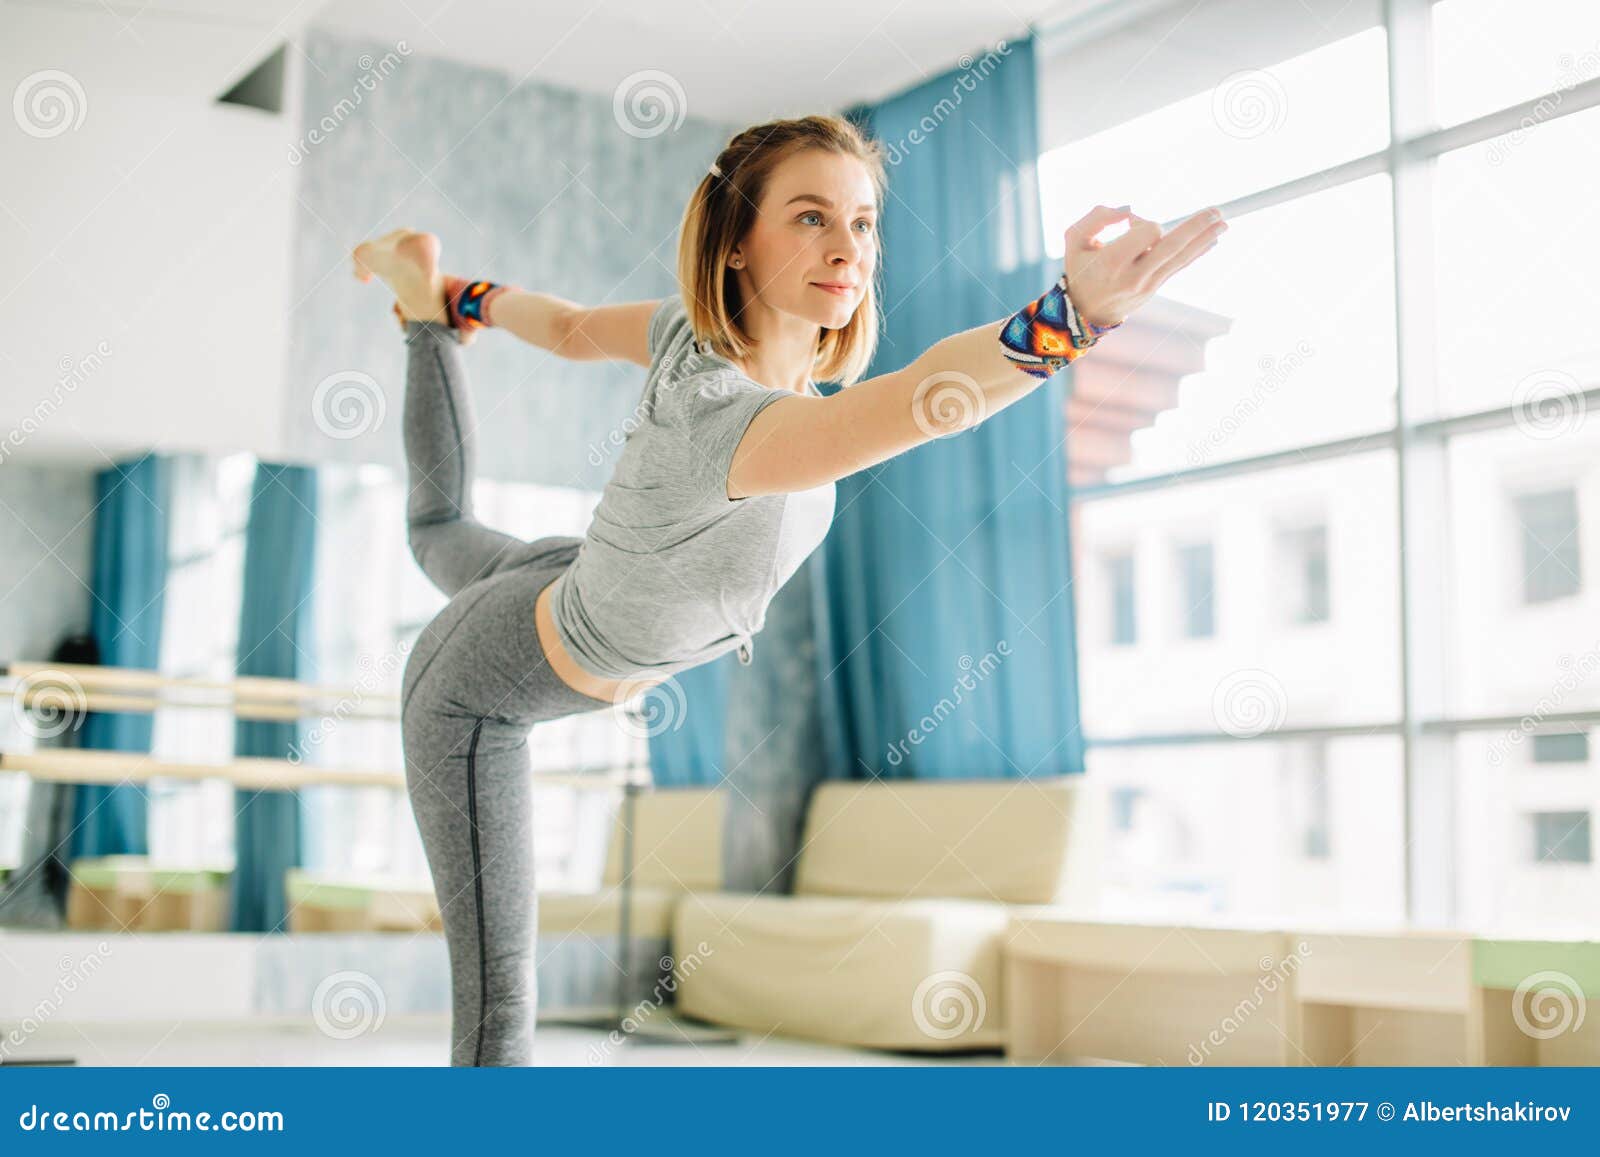 A Yoga Pose to Promote Digestion | BOARD30 ABQ